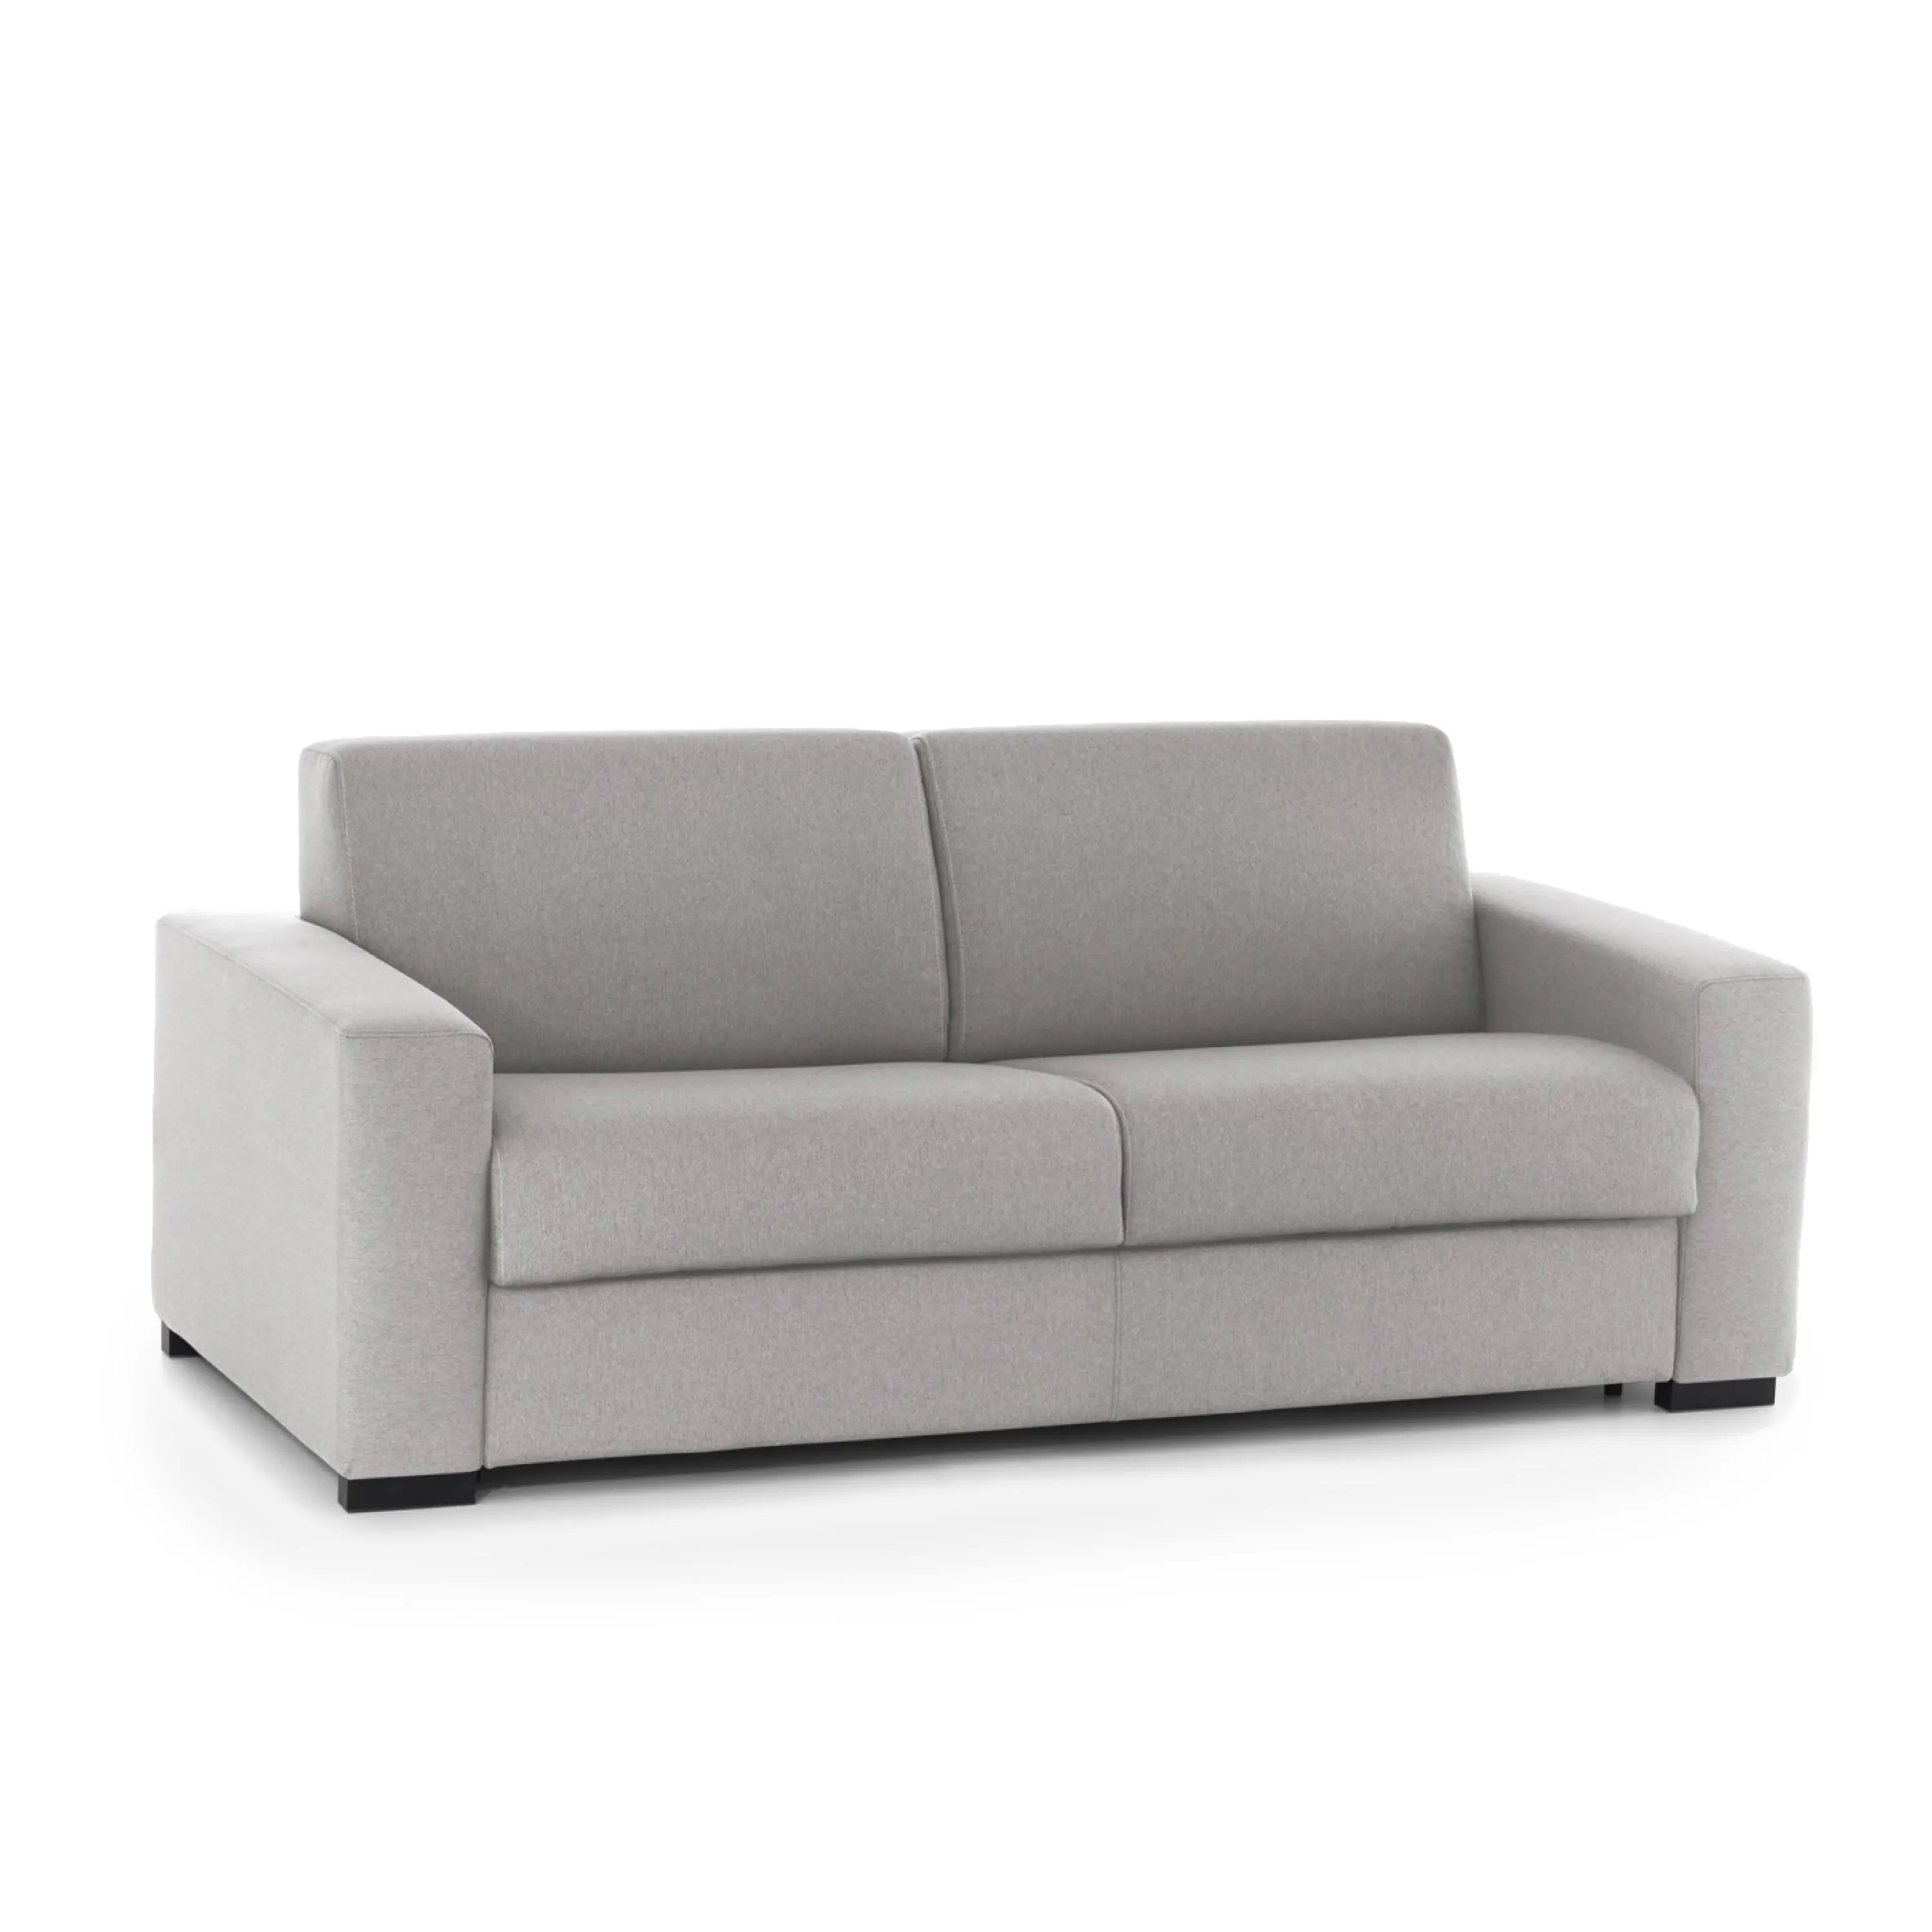 Made in Italy living room Sofa bed Elisabetta modern italian with high quality bed removable and washable fabric cover